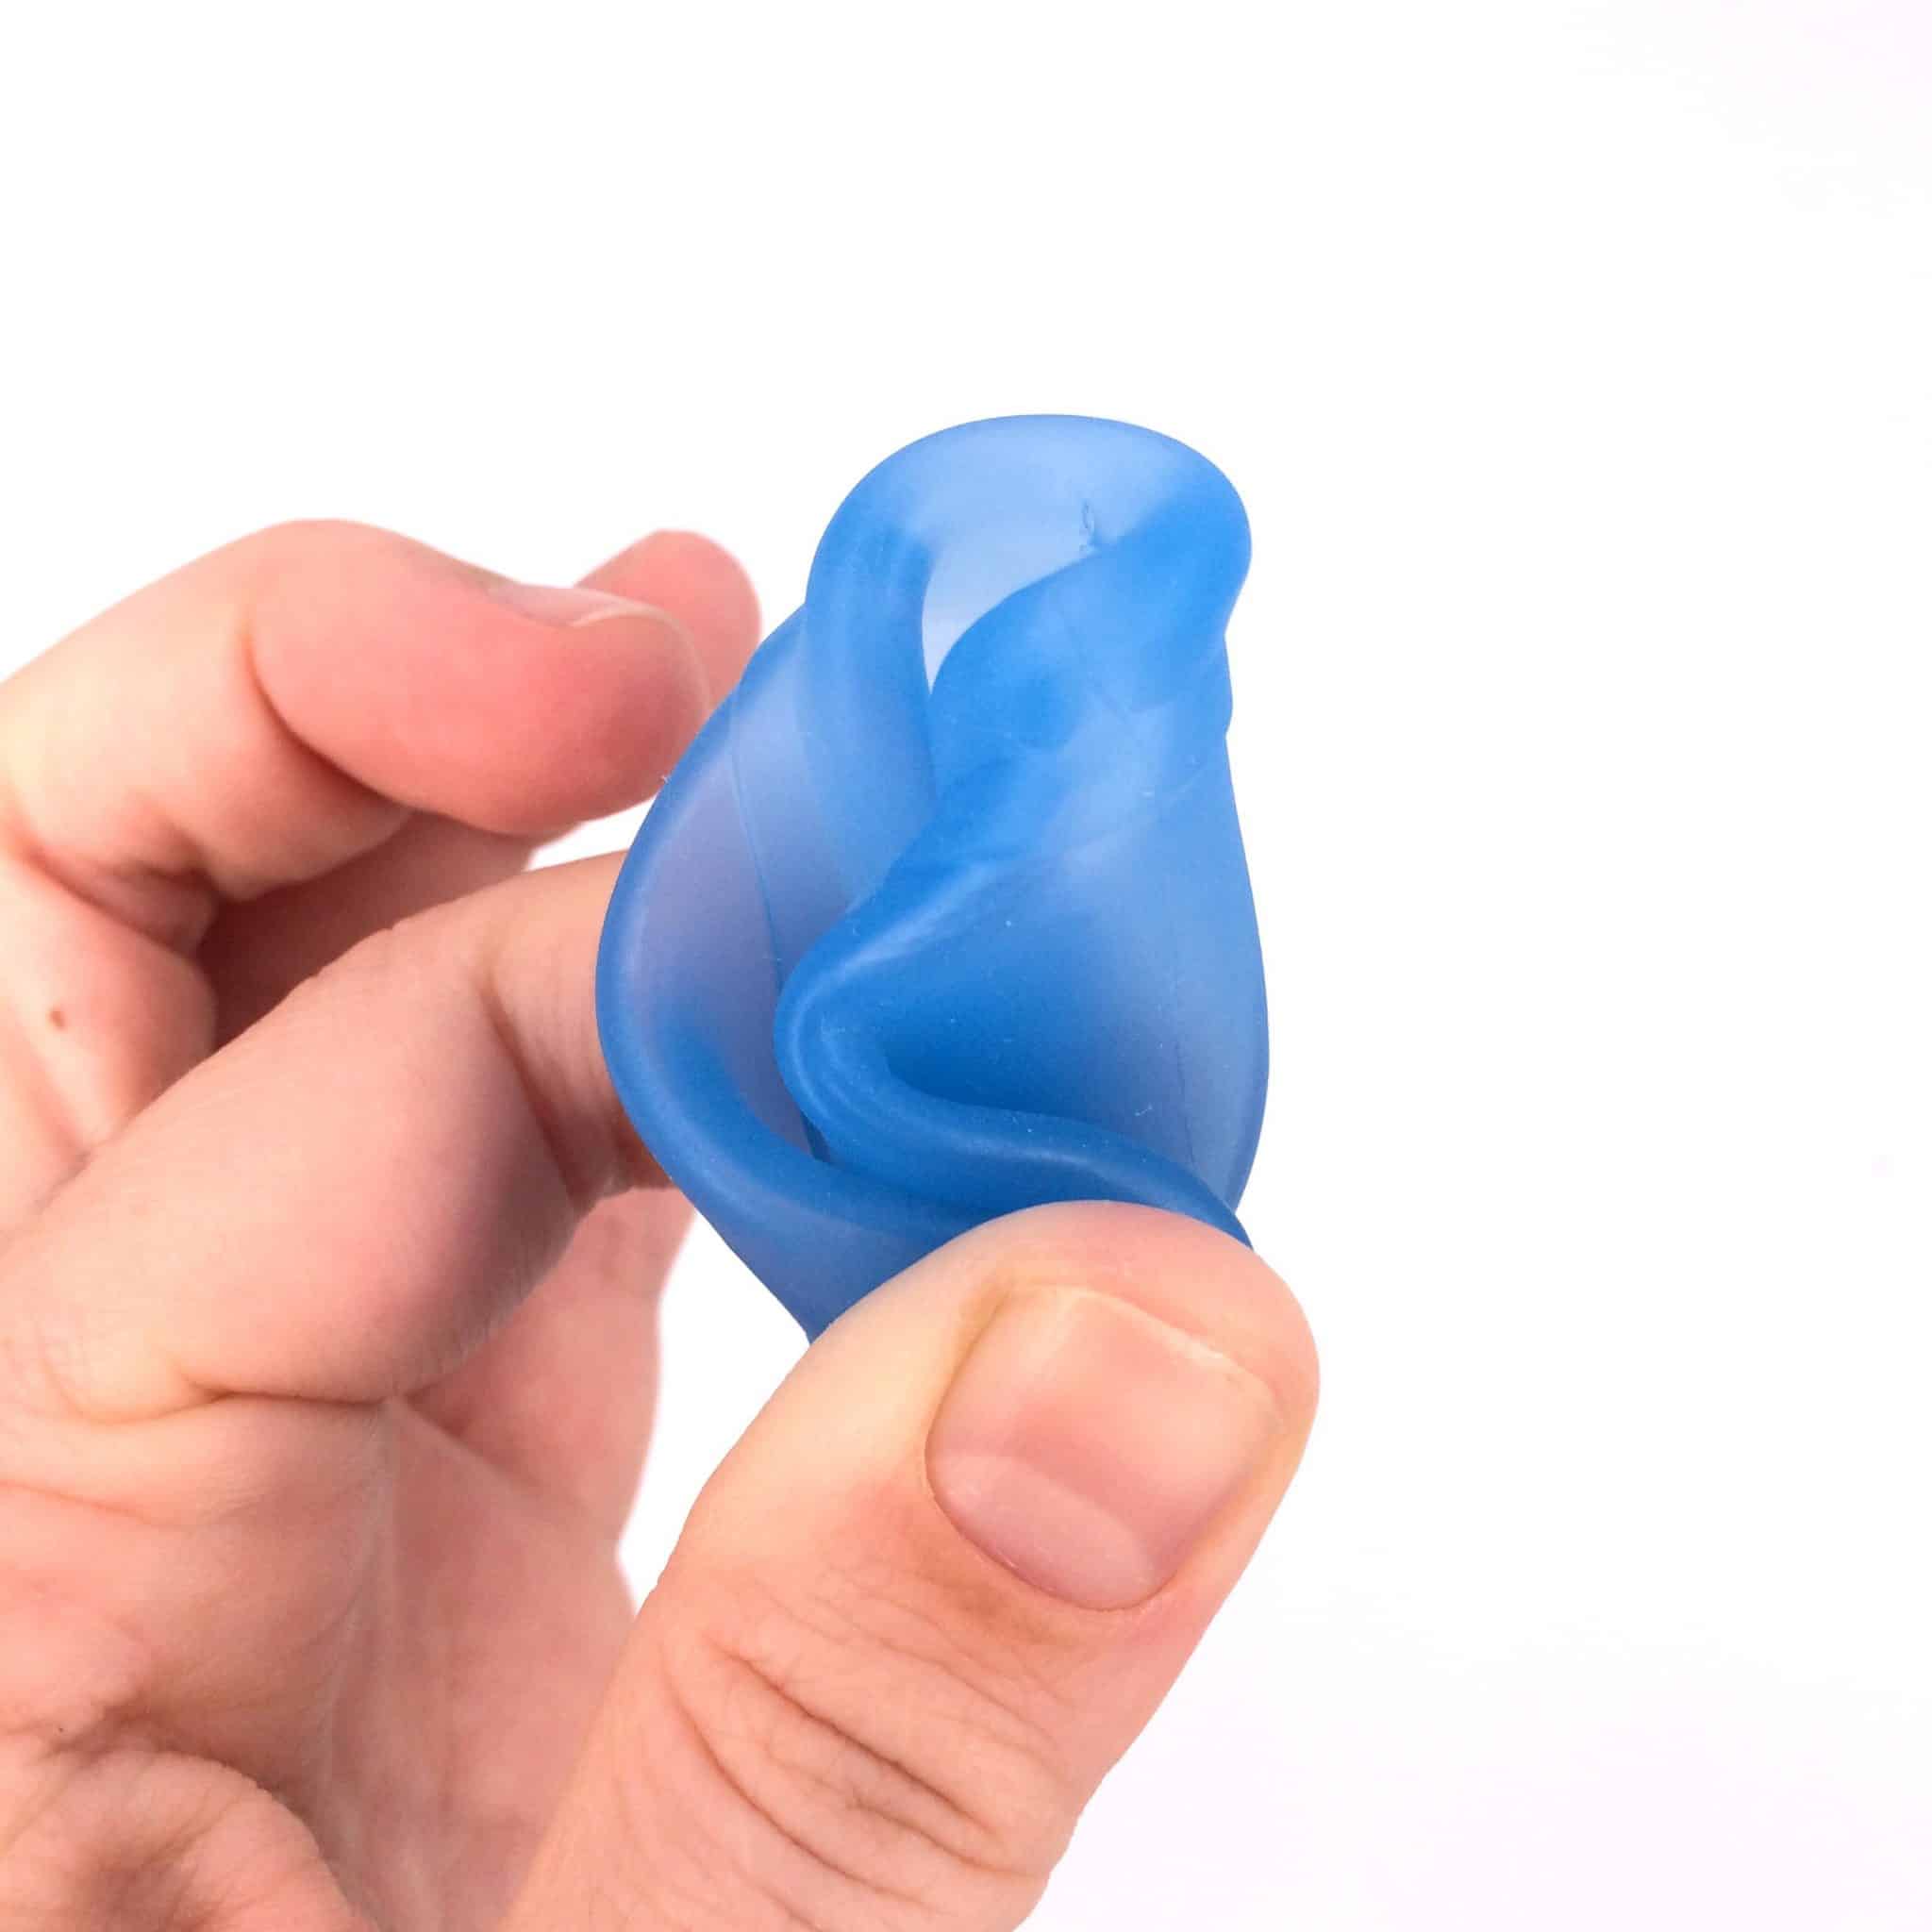 Menstrual cup folds: 15 shapes for you to choose your favorite